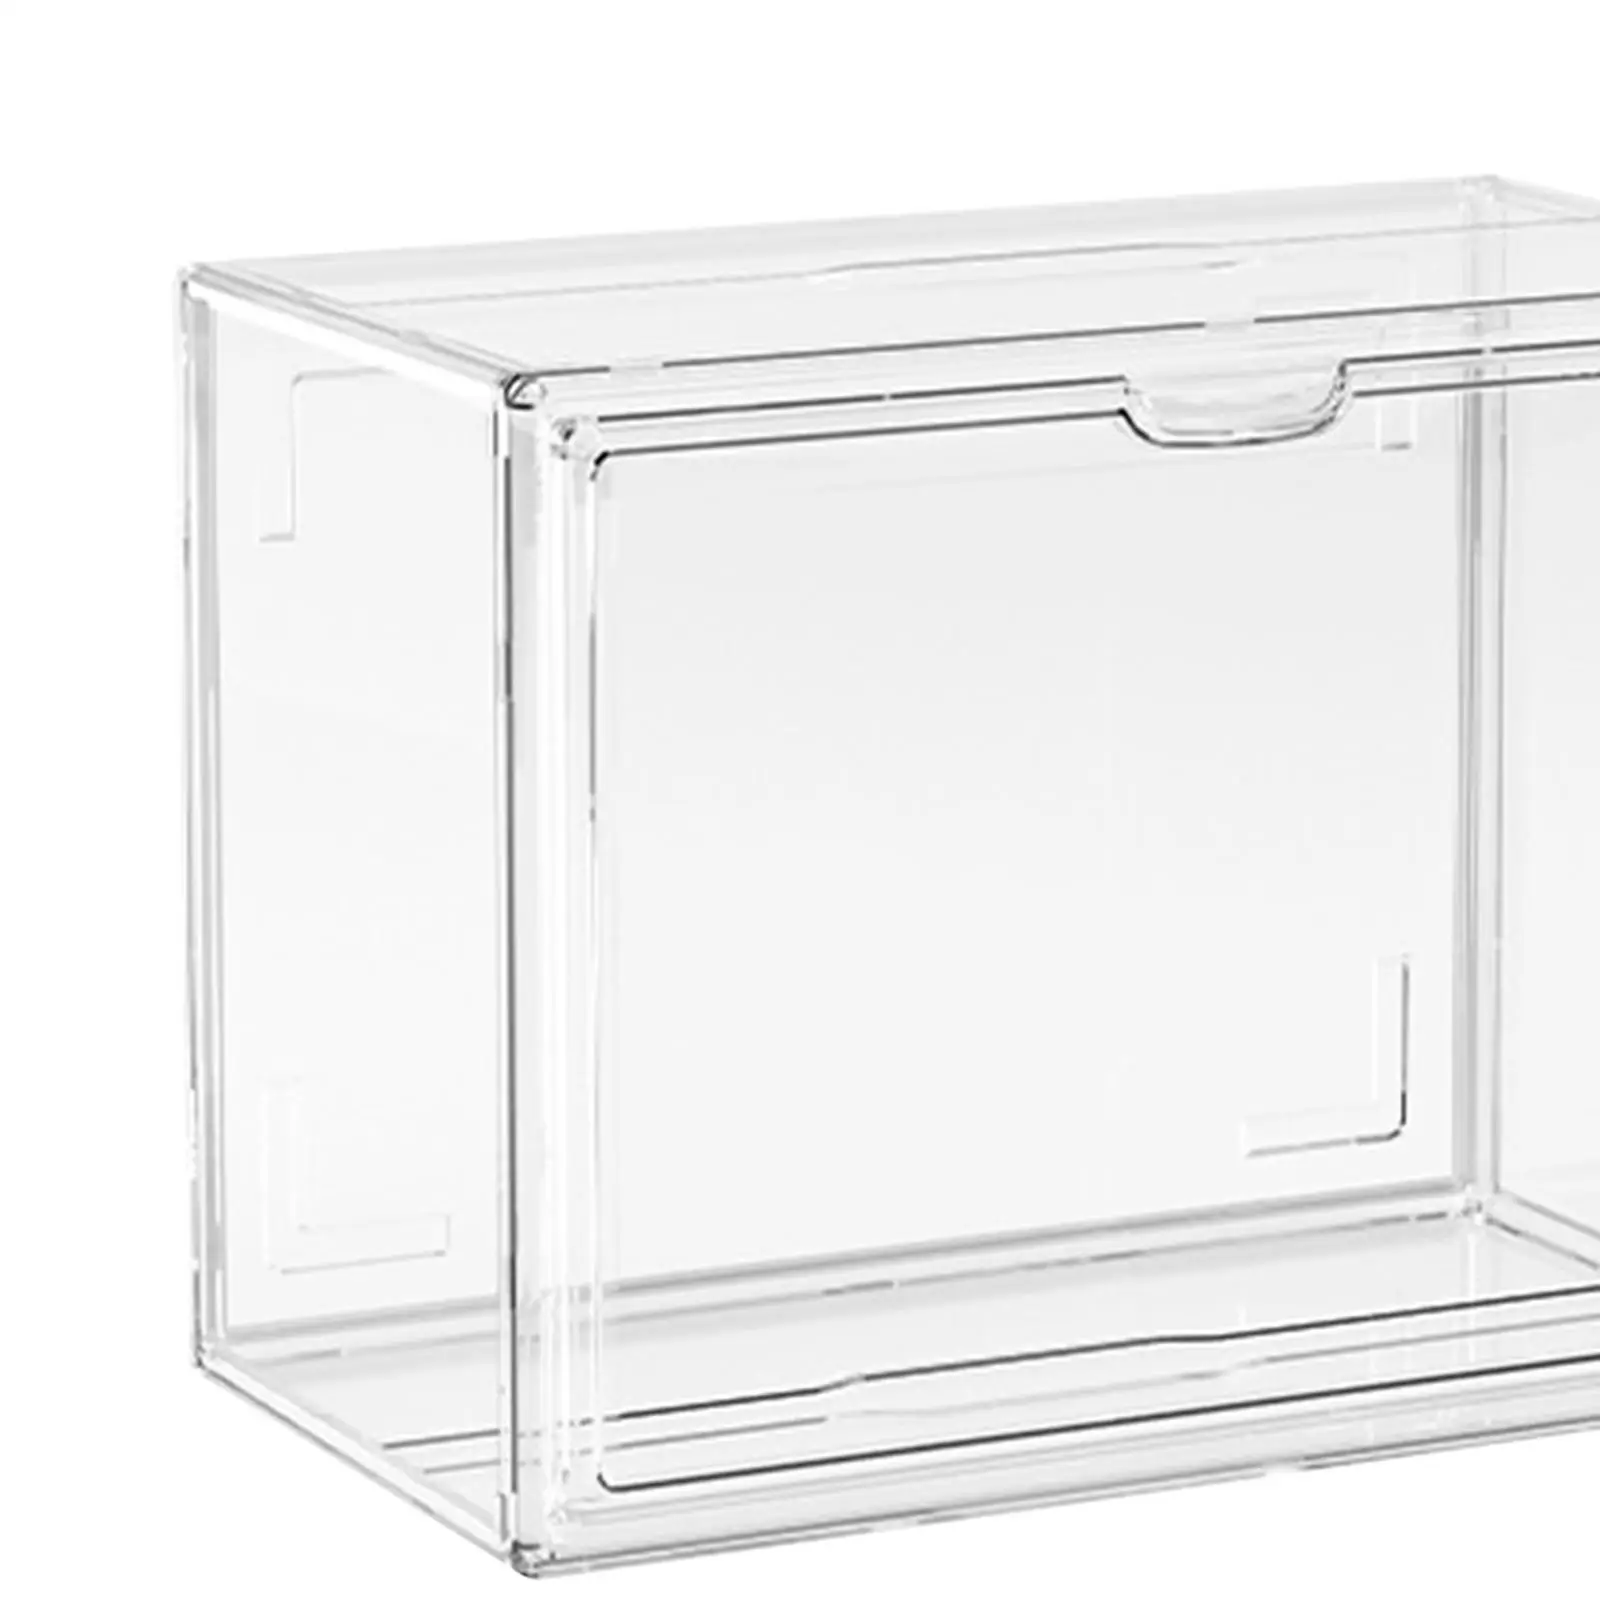 Clear Display Case Dustproof Countertop Display Rack Cube Organizer Protection Shelf Stand Display Box for Miniature Figurines